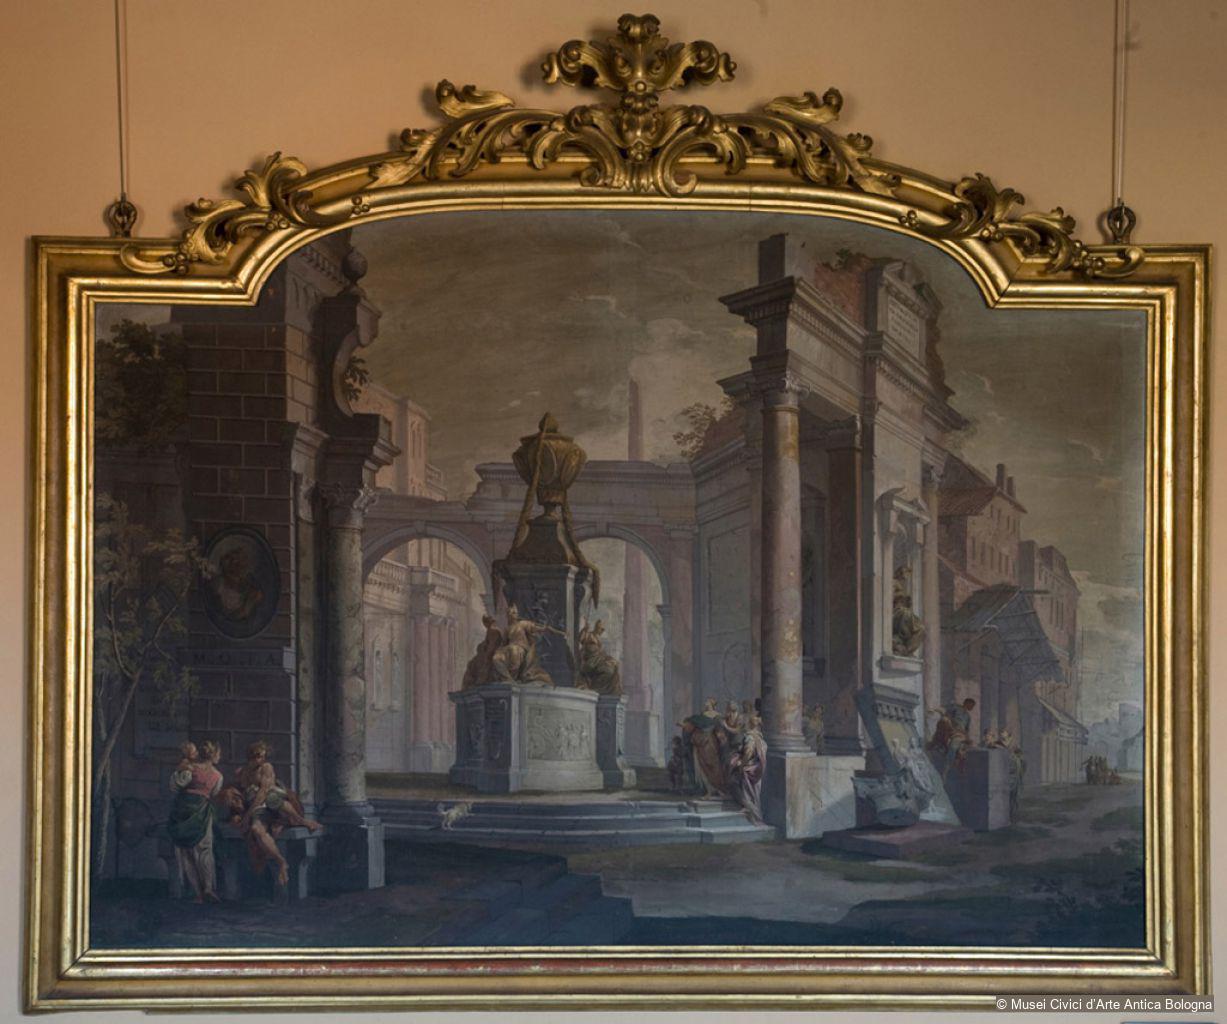 Views with ruins - Discover Baroque Art - Virtual Museum